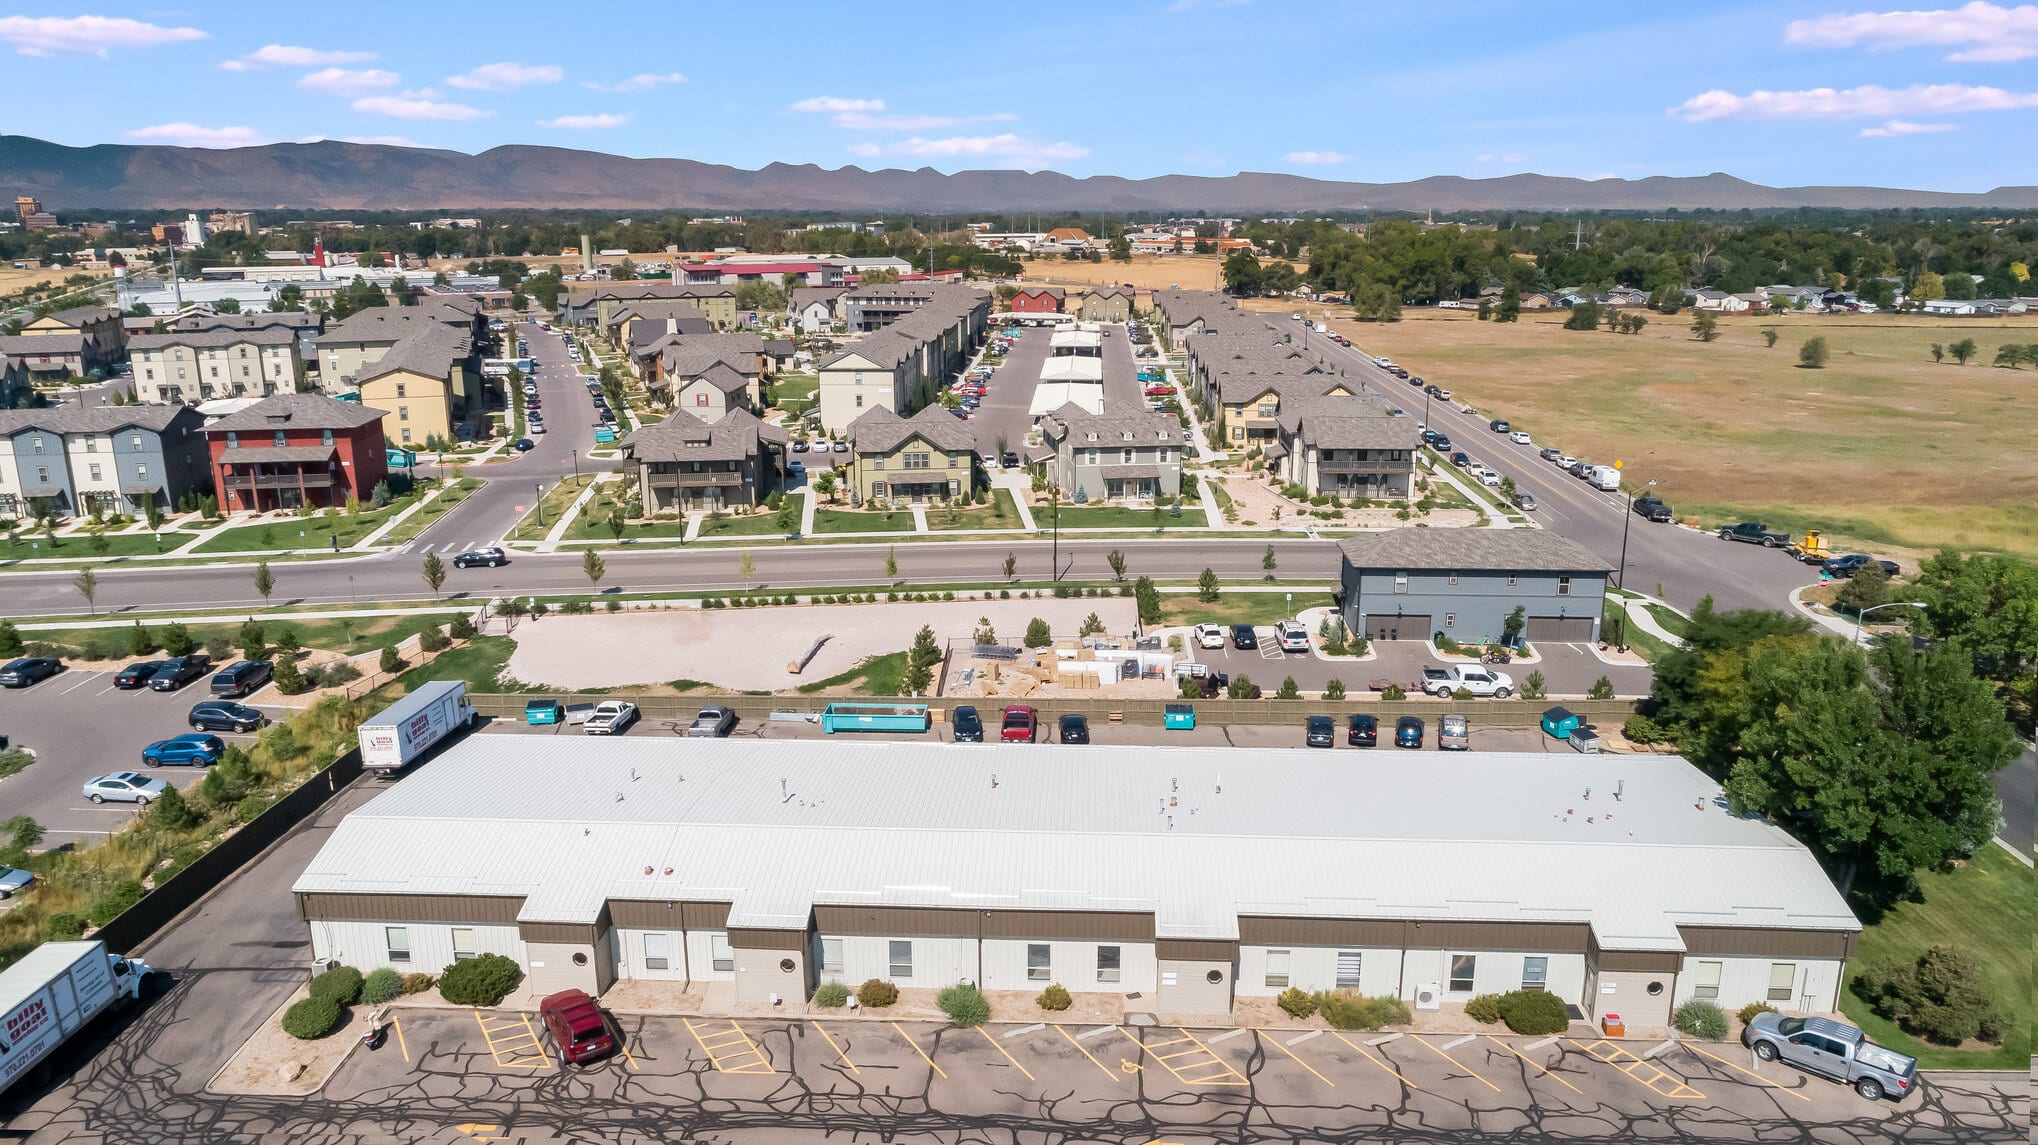 Aerial view showing the outside of a commercial building in a neighborhood next to the foothills